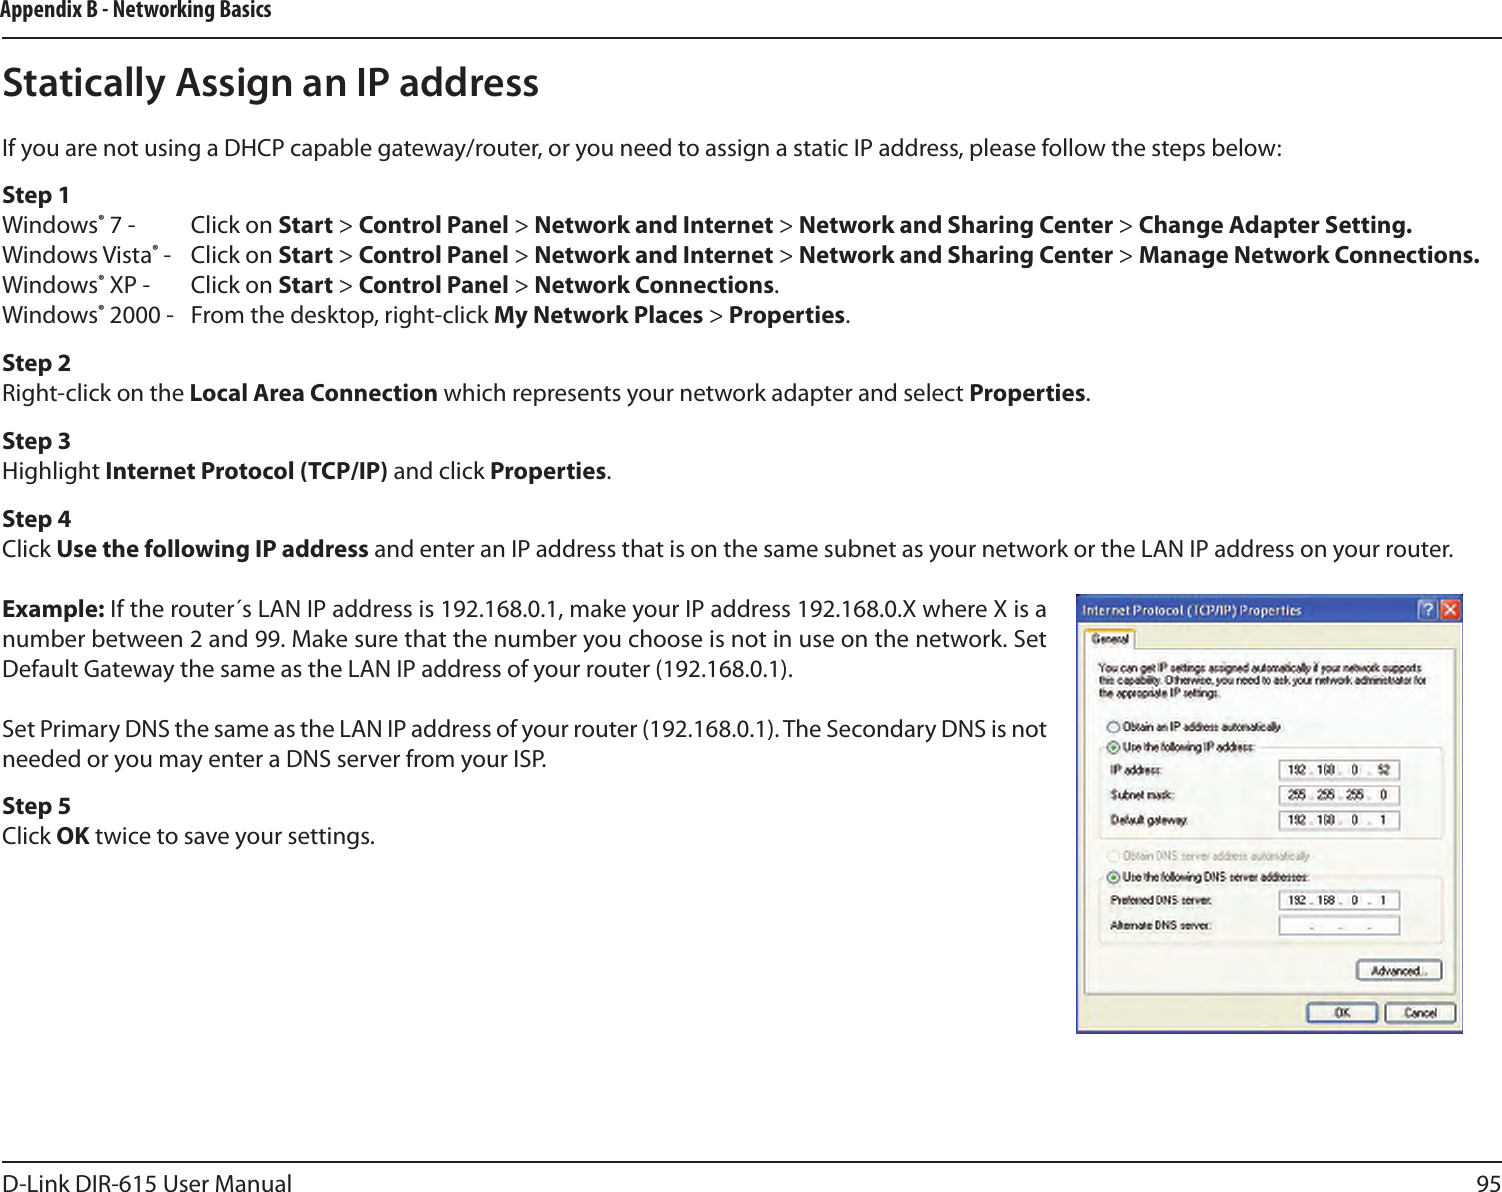 95D-Link DIR-615 User ManualAppendix B - Networking BasicsStatically Assign an IP addressIf you are not using a DHCP capable gateway/router, or you need to assign a static IP address, please follow the steps below:Step 1Windows® 7 -  Click on Start &gt; Control Panel &gt; Network and Internet &gt; Network and Sharing Center &gt; Change Adapter Setting. Windows Vista® -  Click on Start &gt; Control Panel &gt; Network and Internet &gt; Network and Sharing Center &gt; Manage Network Connections.Windows® XP -  Click on Start &gt; Control Panel &gt; Network Connections.Windows® 2000 -  From the desktop, right-click My Network Places &gt; Properties.Step 2Right-click on the Local Area Connection which represents your network adapter and select Properties.Step 3Highlight Internet Protocol (TCP/IP) and click Properties.Step 4Click Use the following IP address and enter an IP address that is on the same subnet as your network or the LAN IP address on your router.Example: If the router´s LAN IP address is 192.168.0.1, make your IP address 192.168.0.X where X is a number between 2 and 99. Make sure that the number you choose is not in use on the network. Set Default Gateway the same as the LAN IP address of your router (192.168.0.1). Set Primary DNS the same as the LAN IP address of your router (192.168.0.1). The Secondary DNS is not needed or you may enter a DNS server from your ISP.Step 5Click OK twice to save your settings.